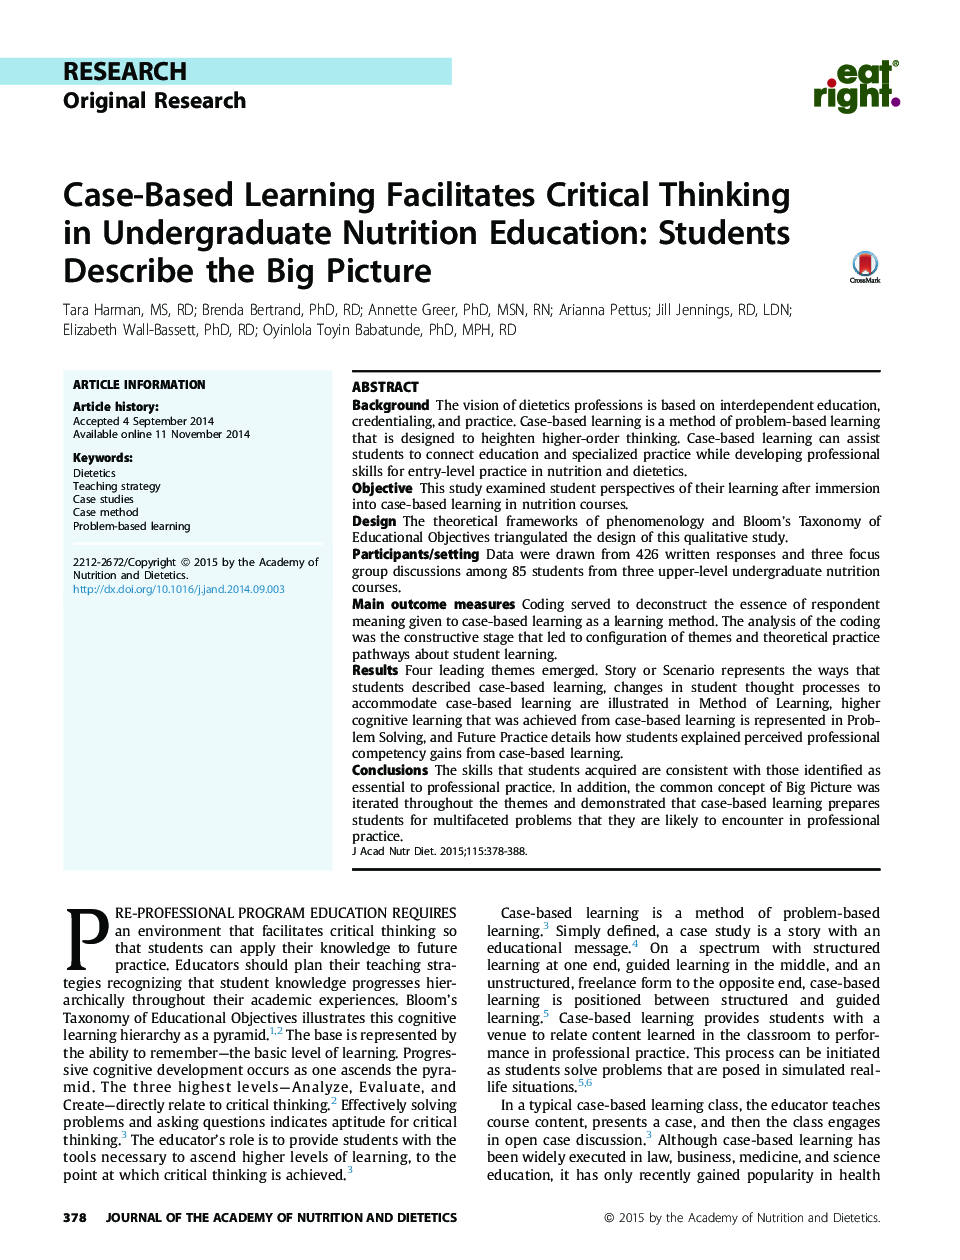 Case-Based Learning Facilitates Critical Thinking in Undergraduate Nutrition Education: Students Describe the Big Picture 